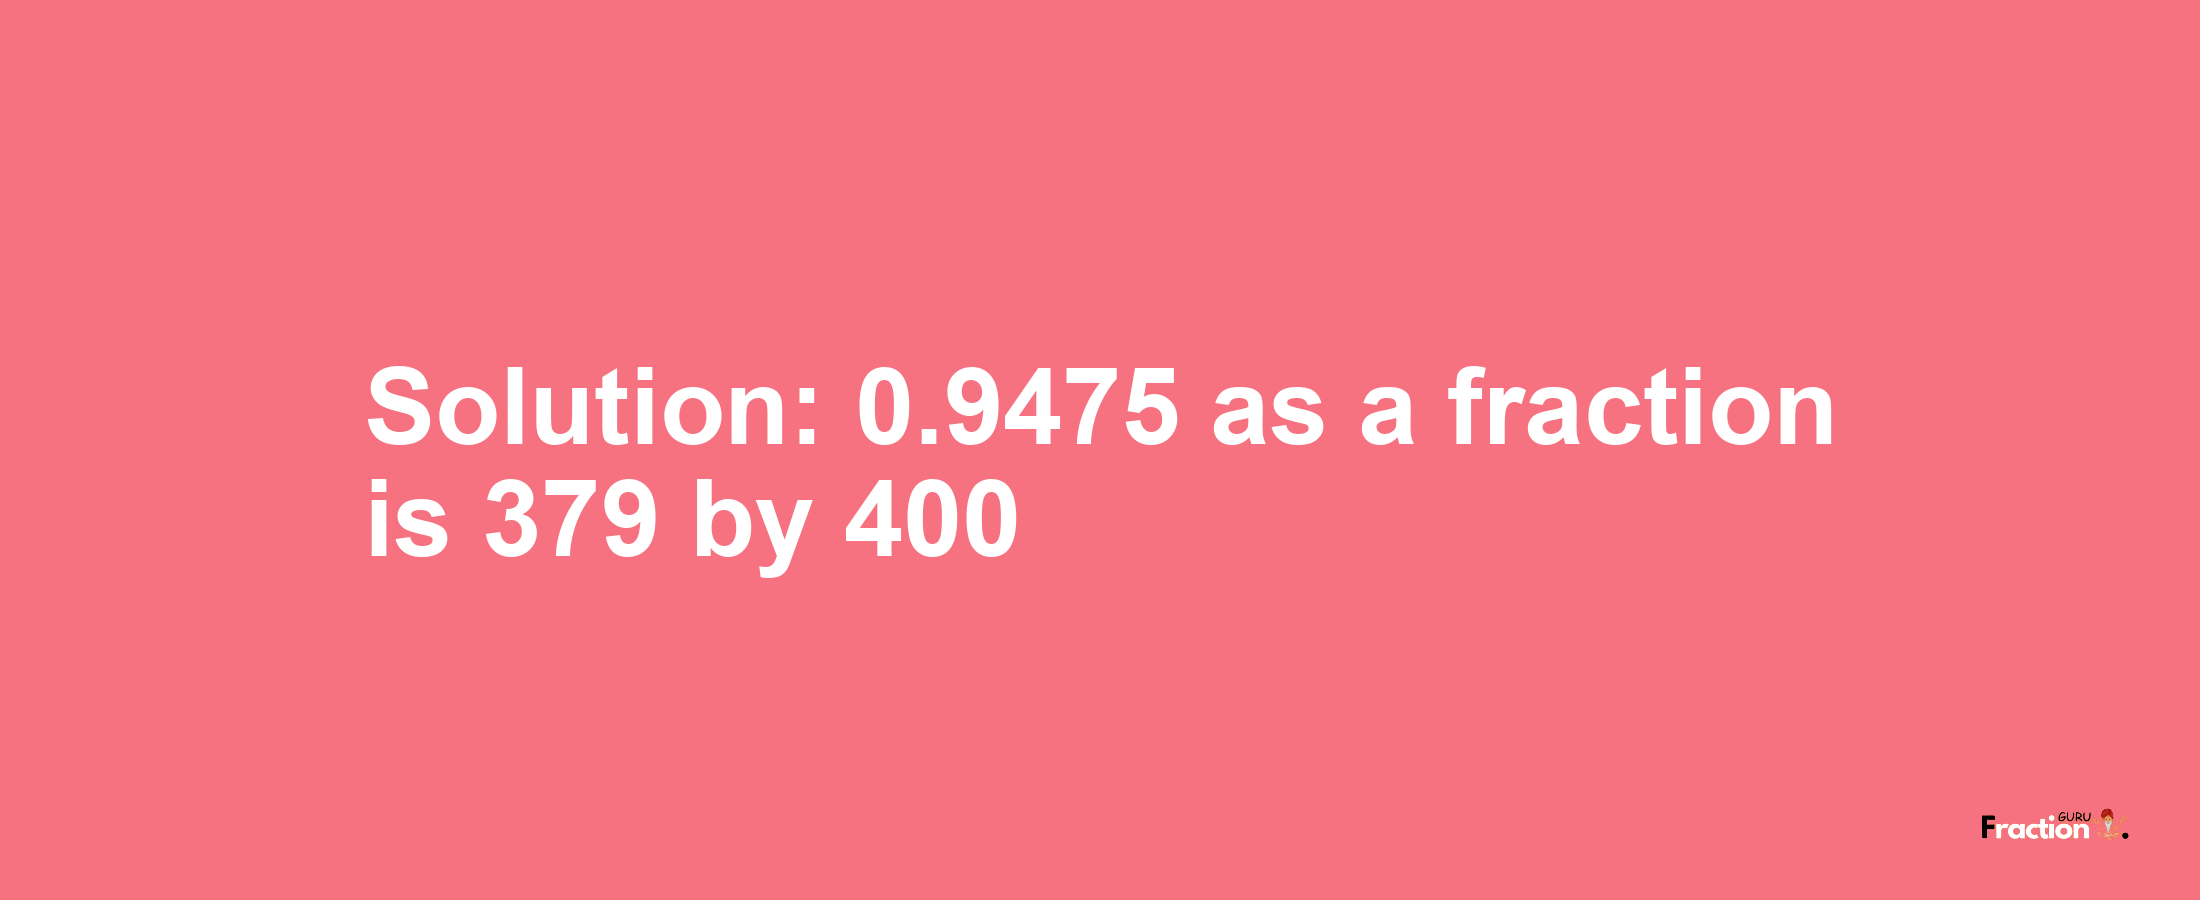 Solution:0.9475 as a fraction is 379/400